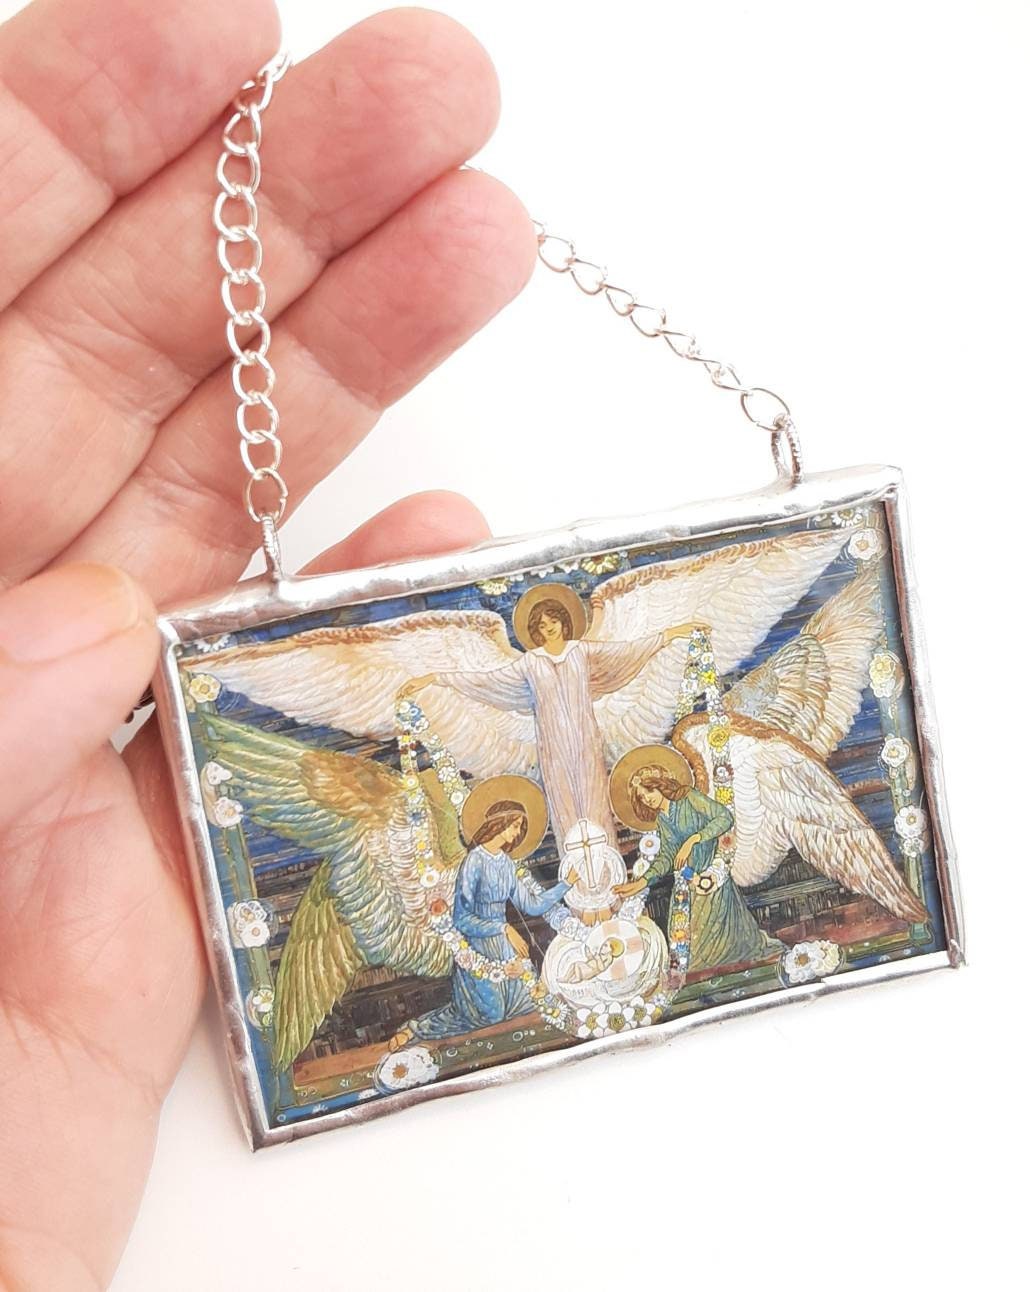 Christmas Ornament Angels Garlanding the Infant Jesus - 2-sided